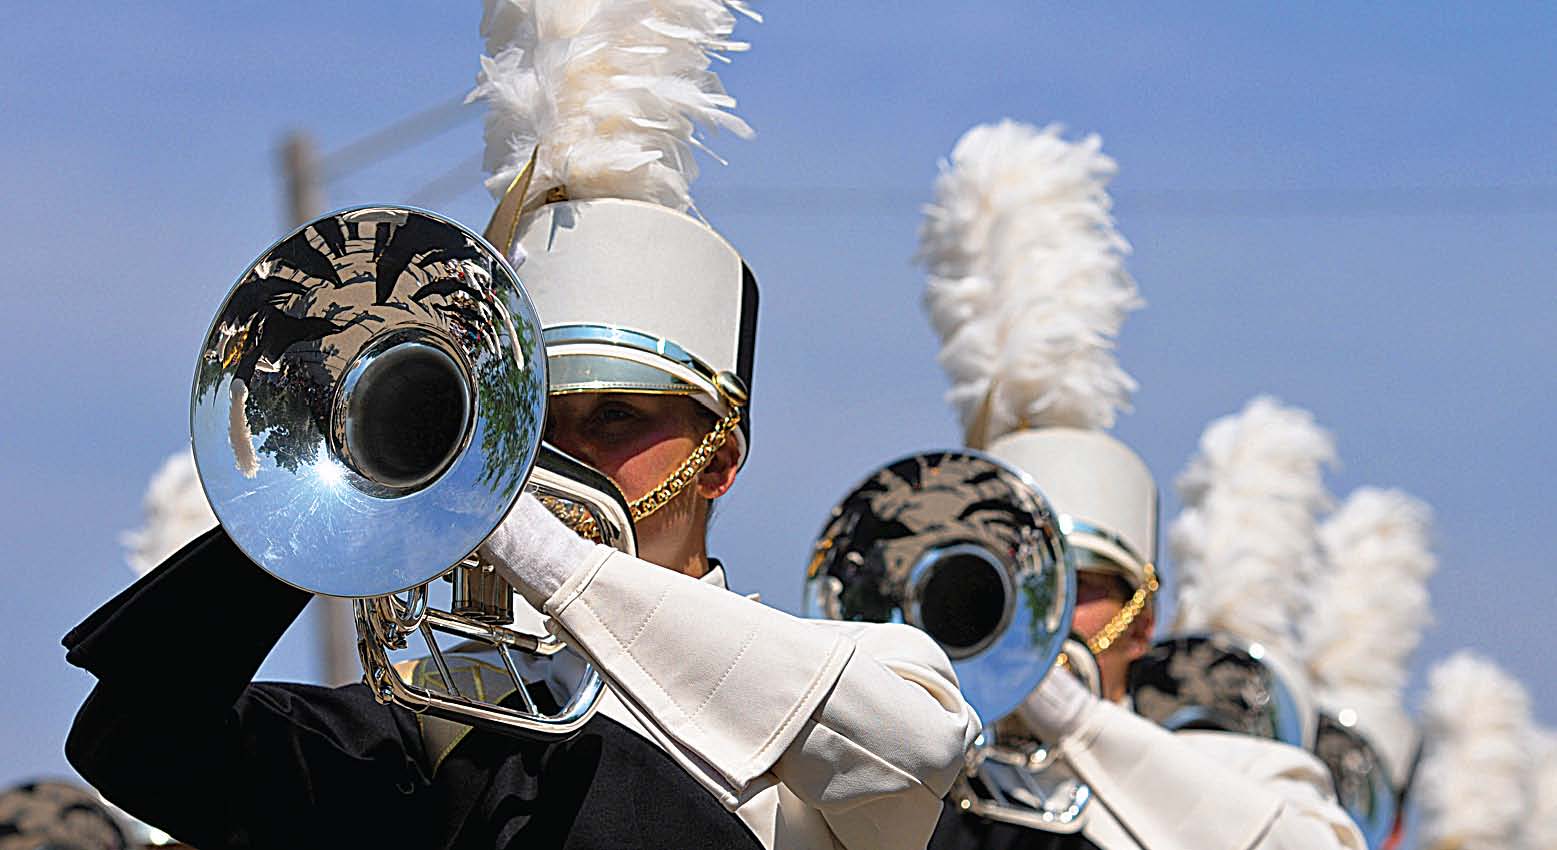 Drum and bugle corps presents Monday showcase of top national groups